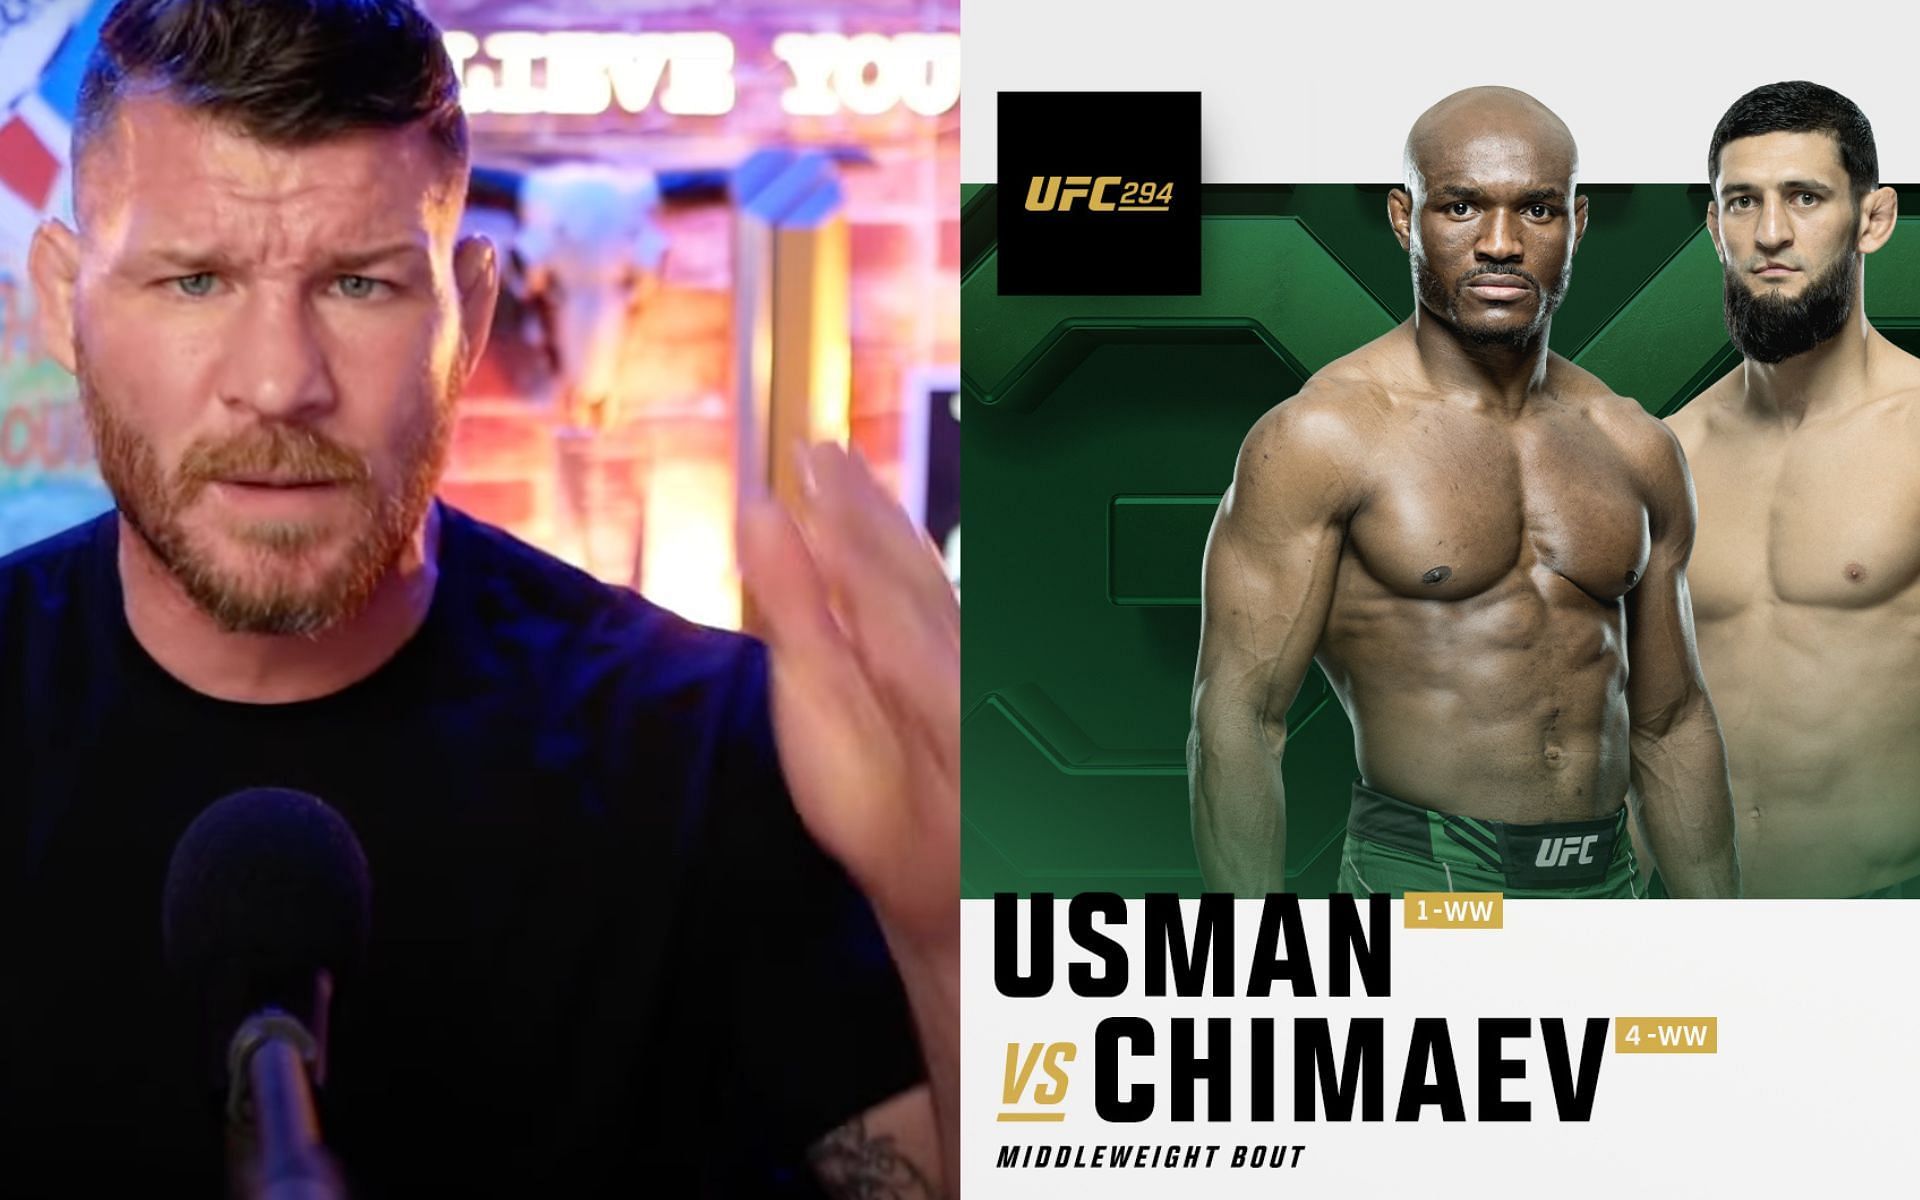 Michael Bisping comments on Chimaev-Usman matchup (Image Courtesy - Michael Bisping on YouTube, @UFC on X/Twitter)